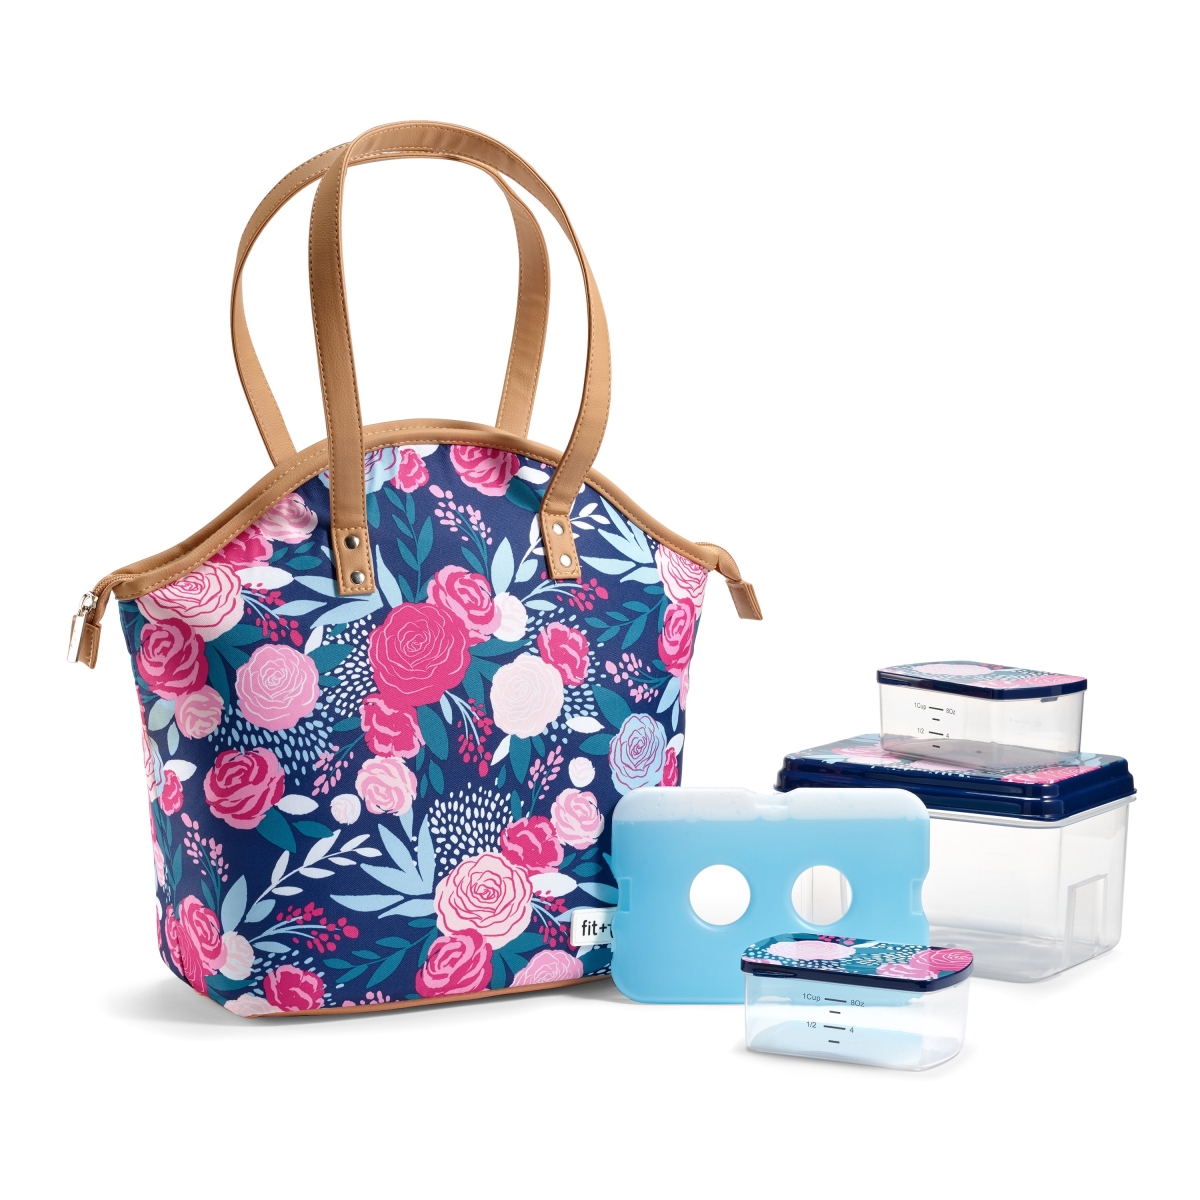 987ff2420 Fit & Fresh Davenport Insulated Lunch Bag Kit With Bpa-free Containers In Navy Lorella Posy